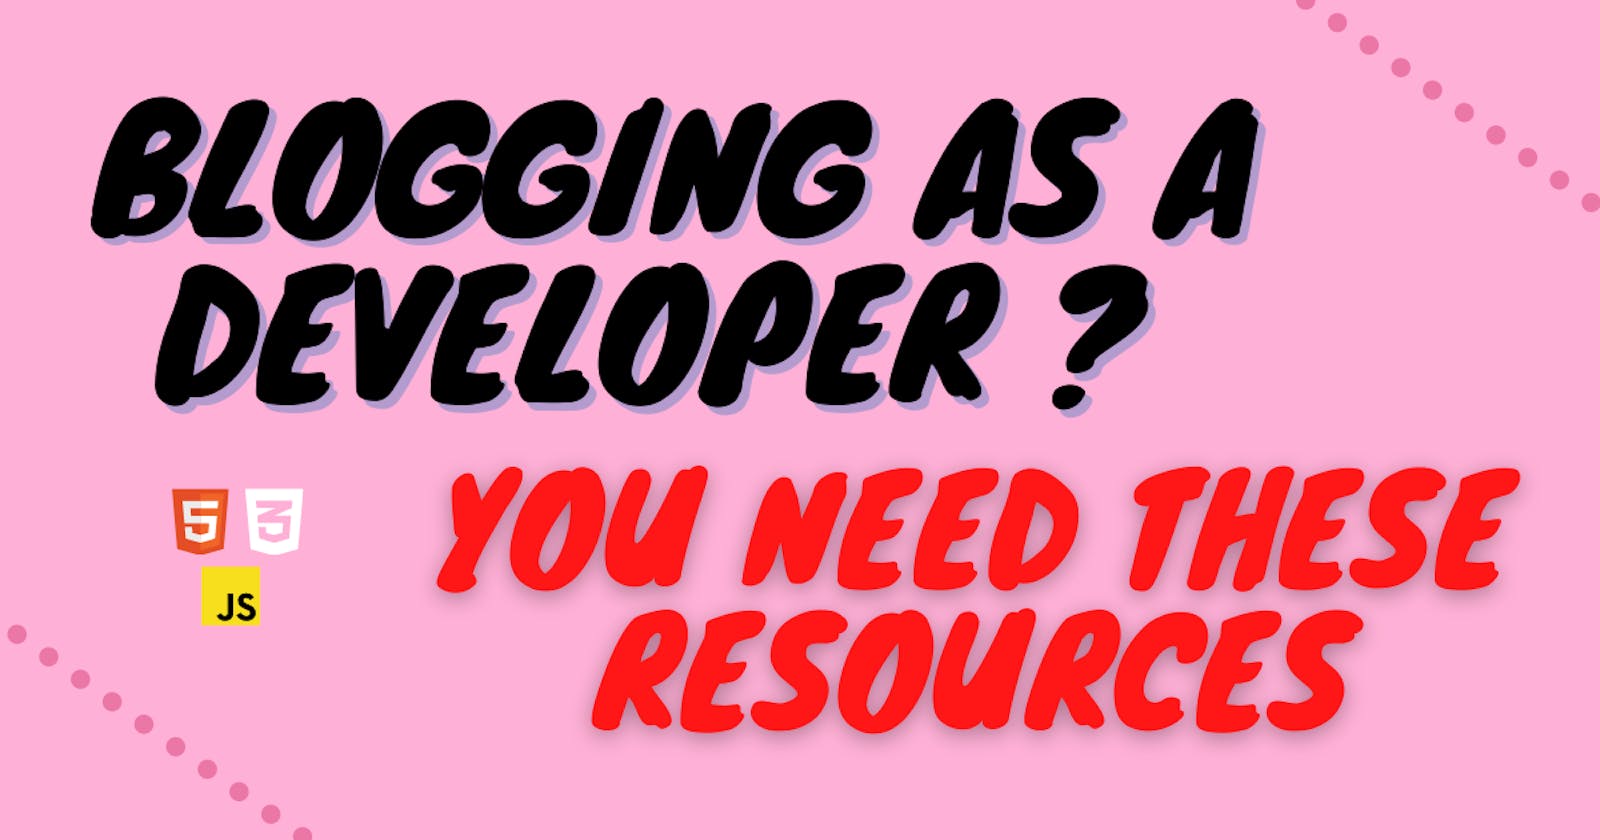 Ultimate and must-have Resources when blogging as a developer